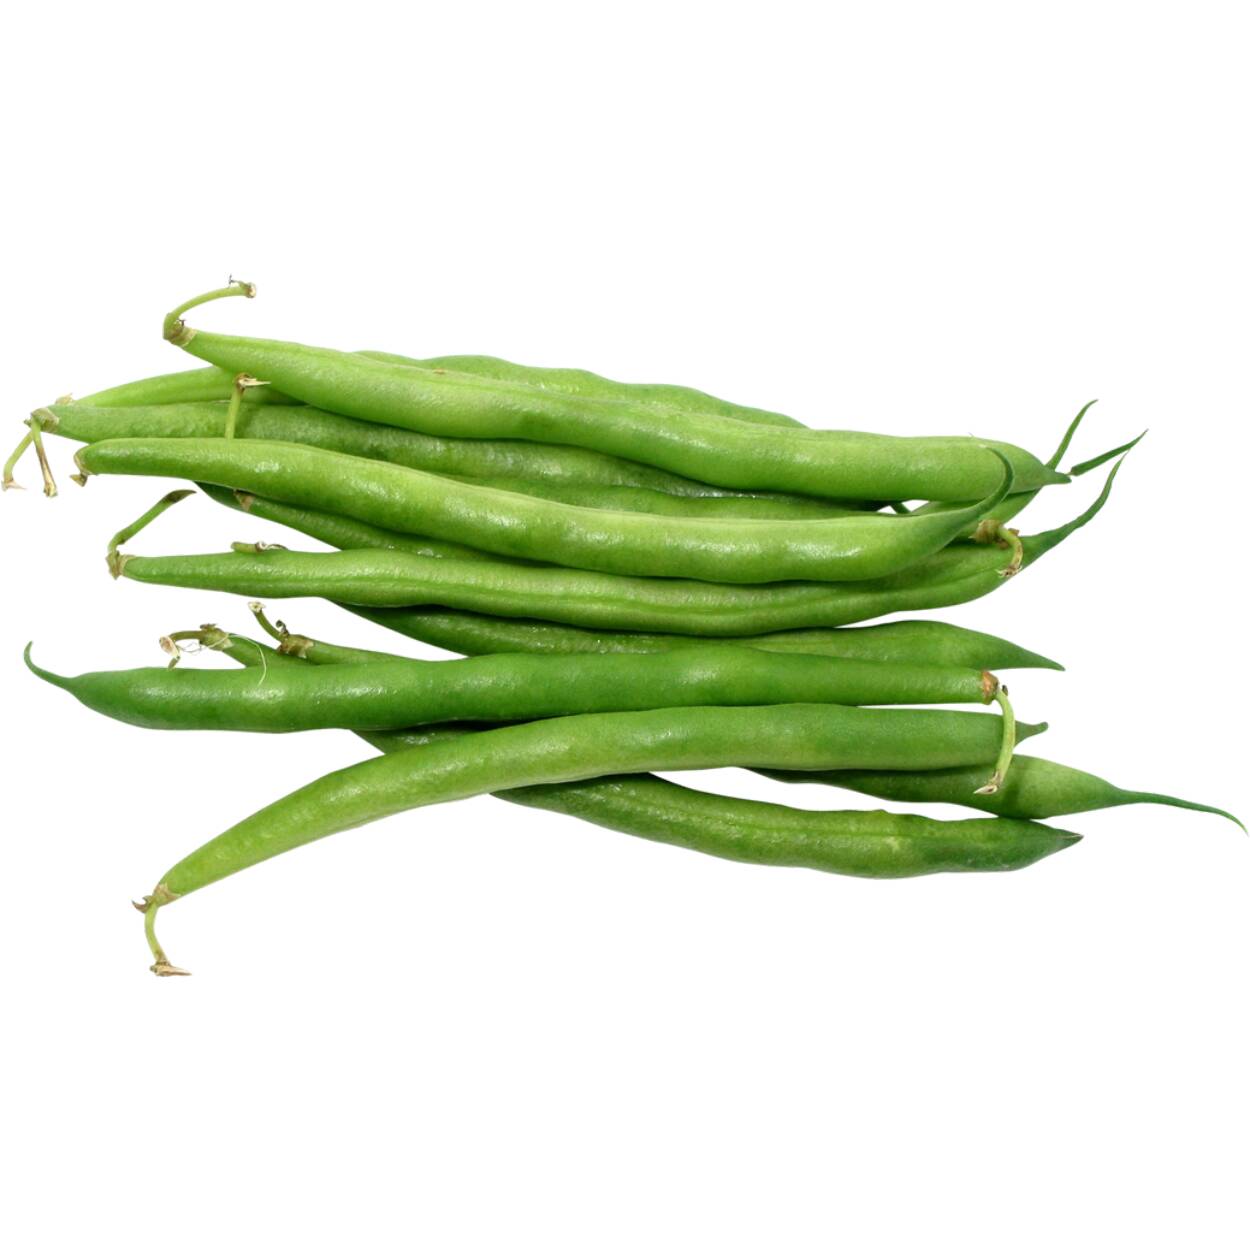 English vocabulary with pictures - Vegetables - Green beans